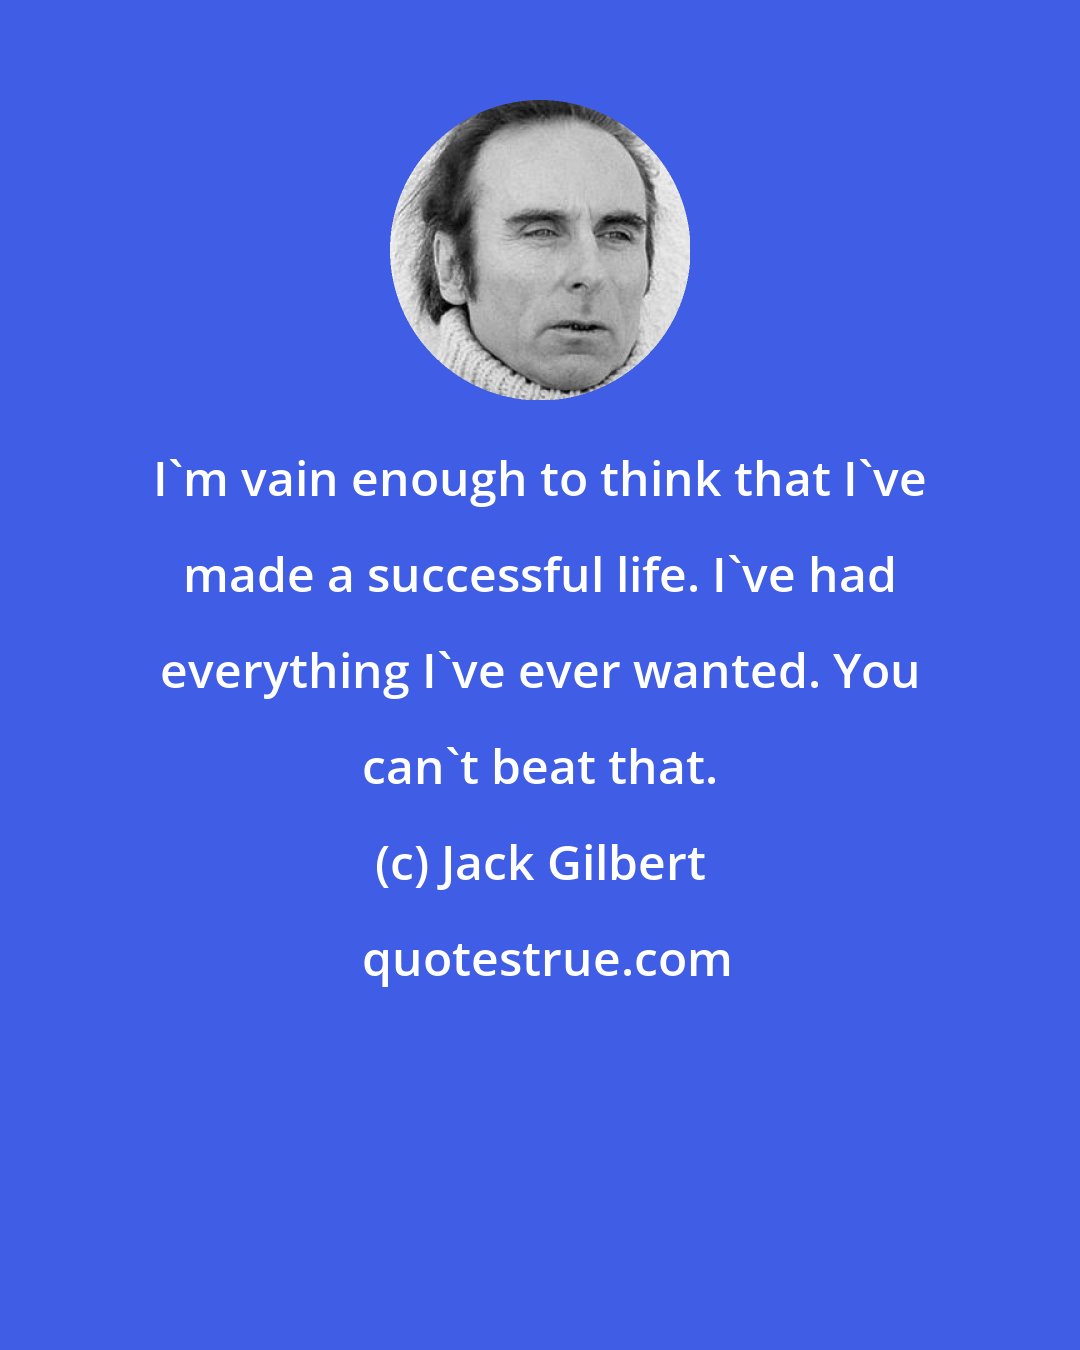 Jack Gilbert: I'm vain enough to think that I've made a successful life. I've had everything I've ever wanted. You can't beat that.